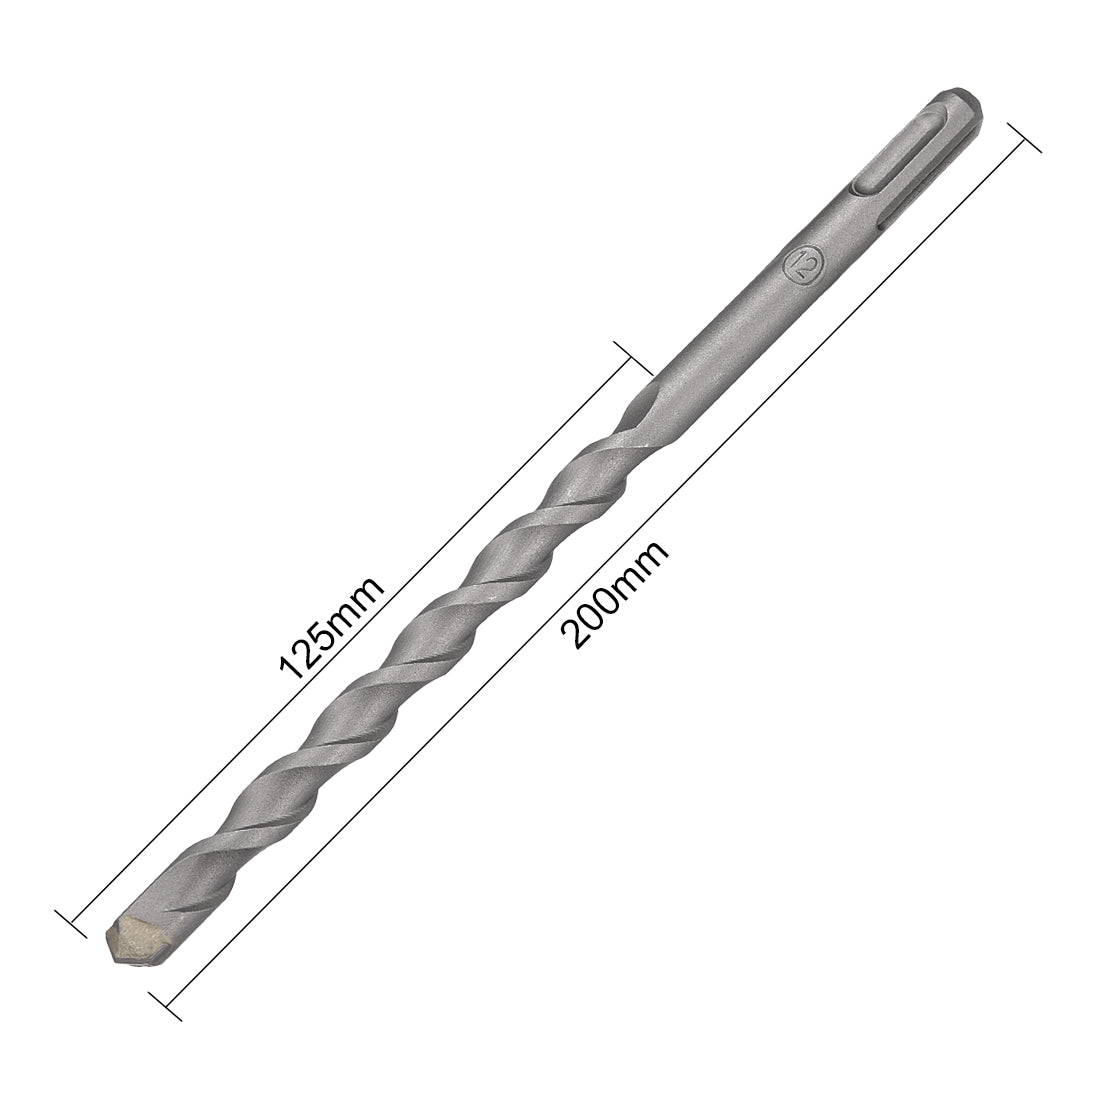 uxcell Uxcell Masonry Drill Bit 12mmx200mm Round Shank 125mm Drilling for Impact Drill